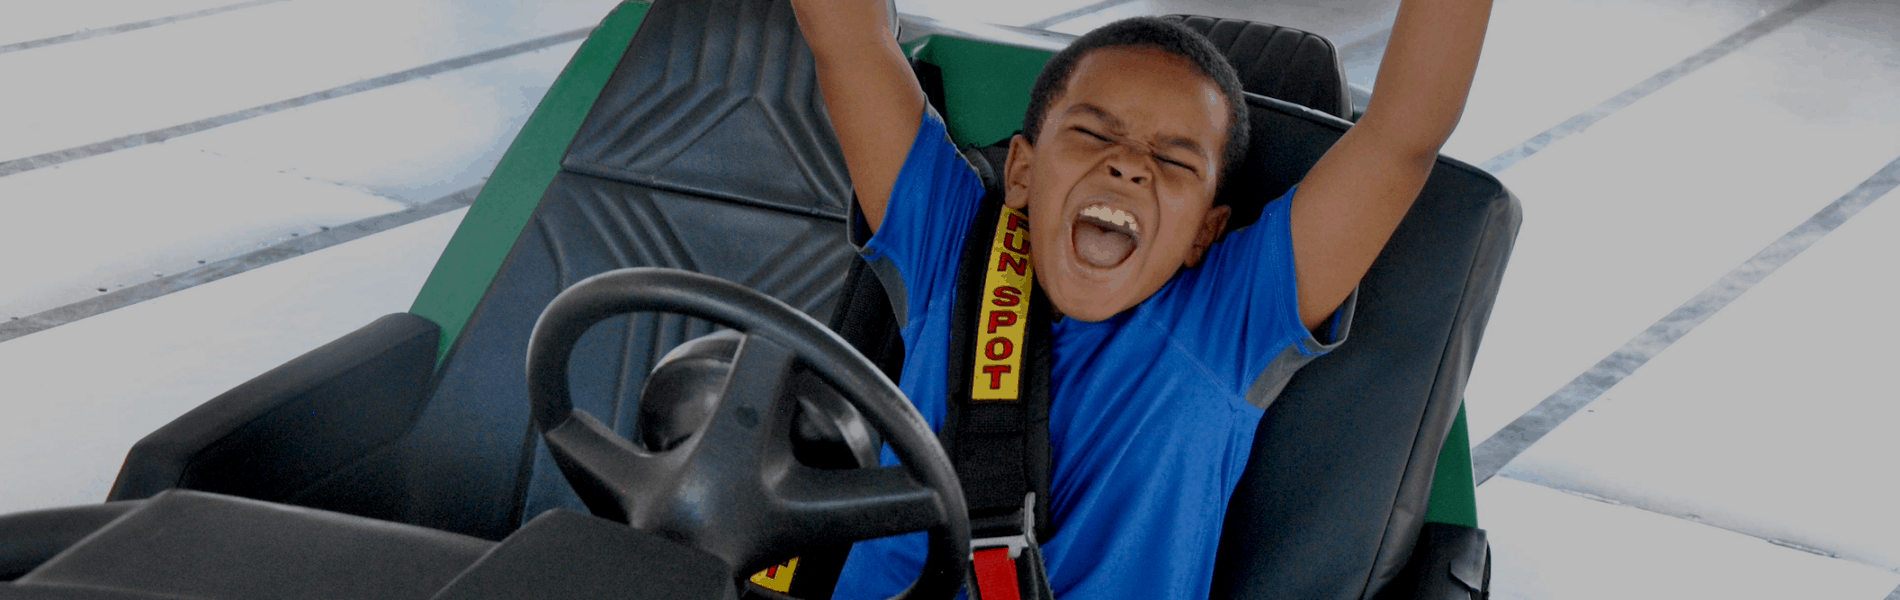 Boy cheering while on go-kart